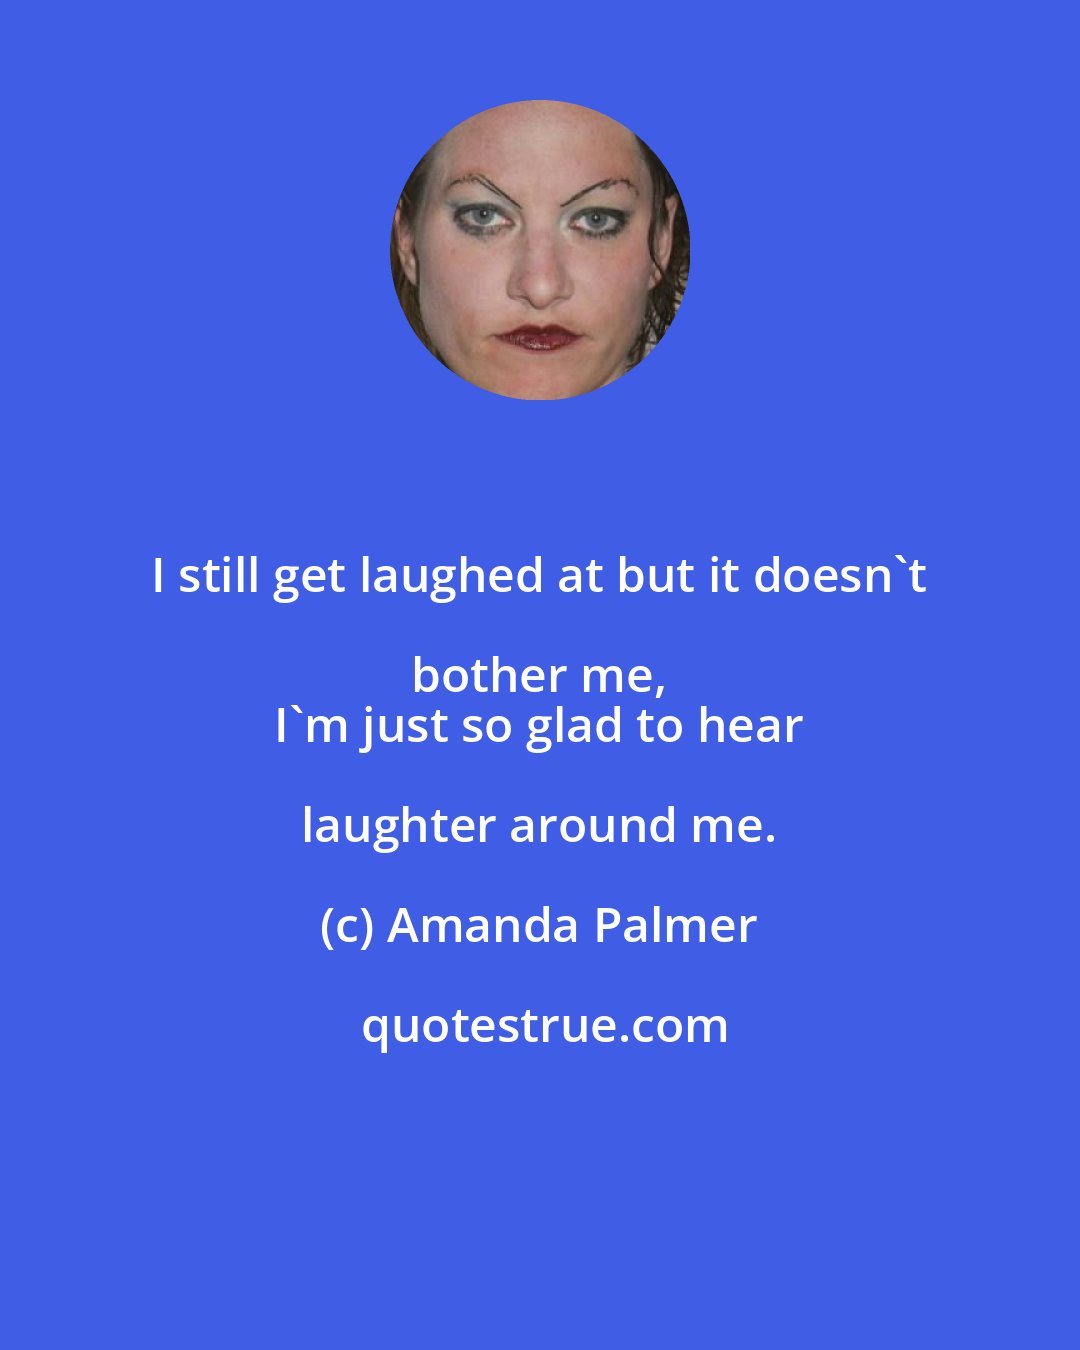 Amanda Palmer: I still get laughed at but it doesn't bother me, 
 I'm just so glad to hear laughter around me.